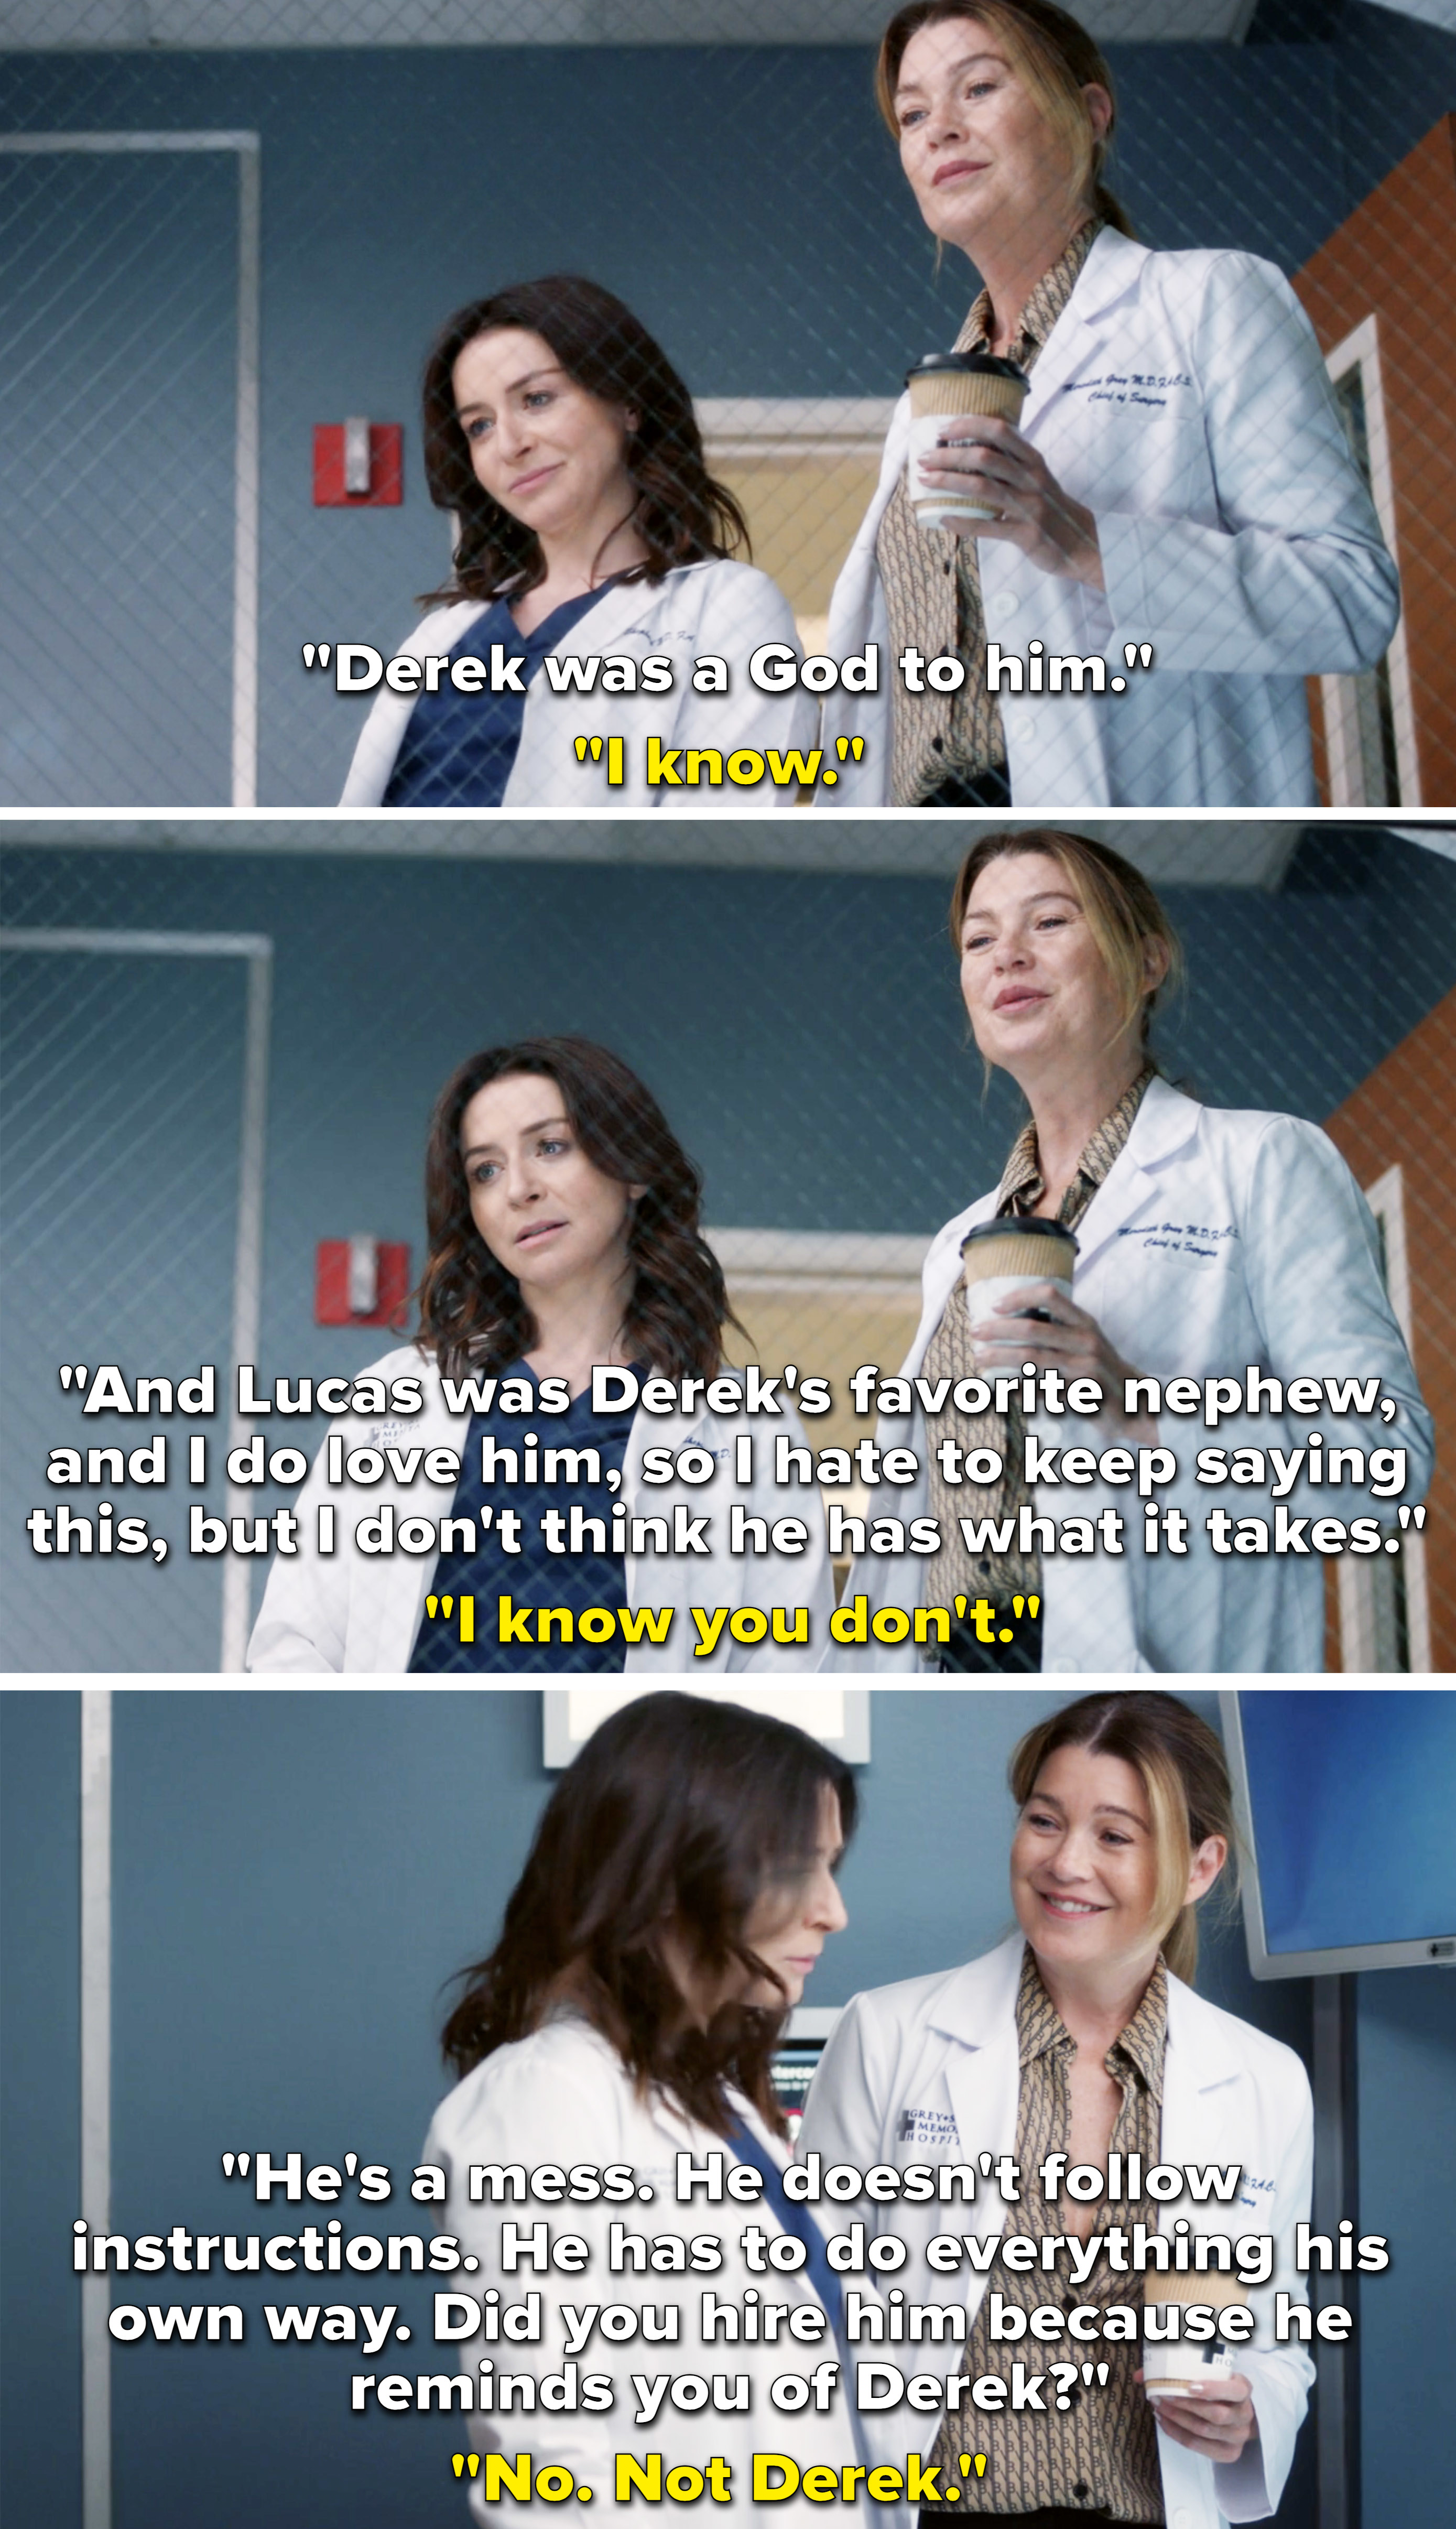 Amelia saying Lucas is a mess and asks if Meredith hired him because he reminds her of Derek